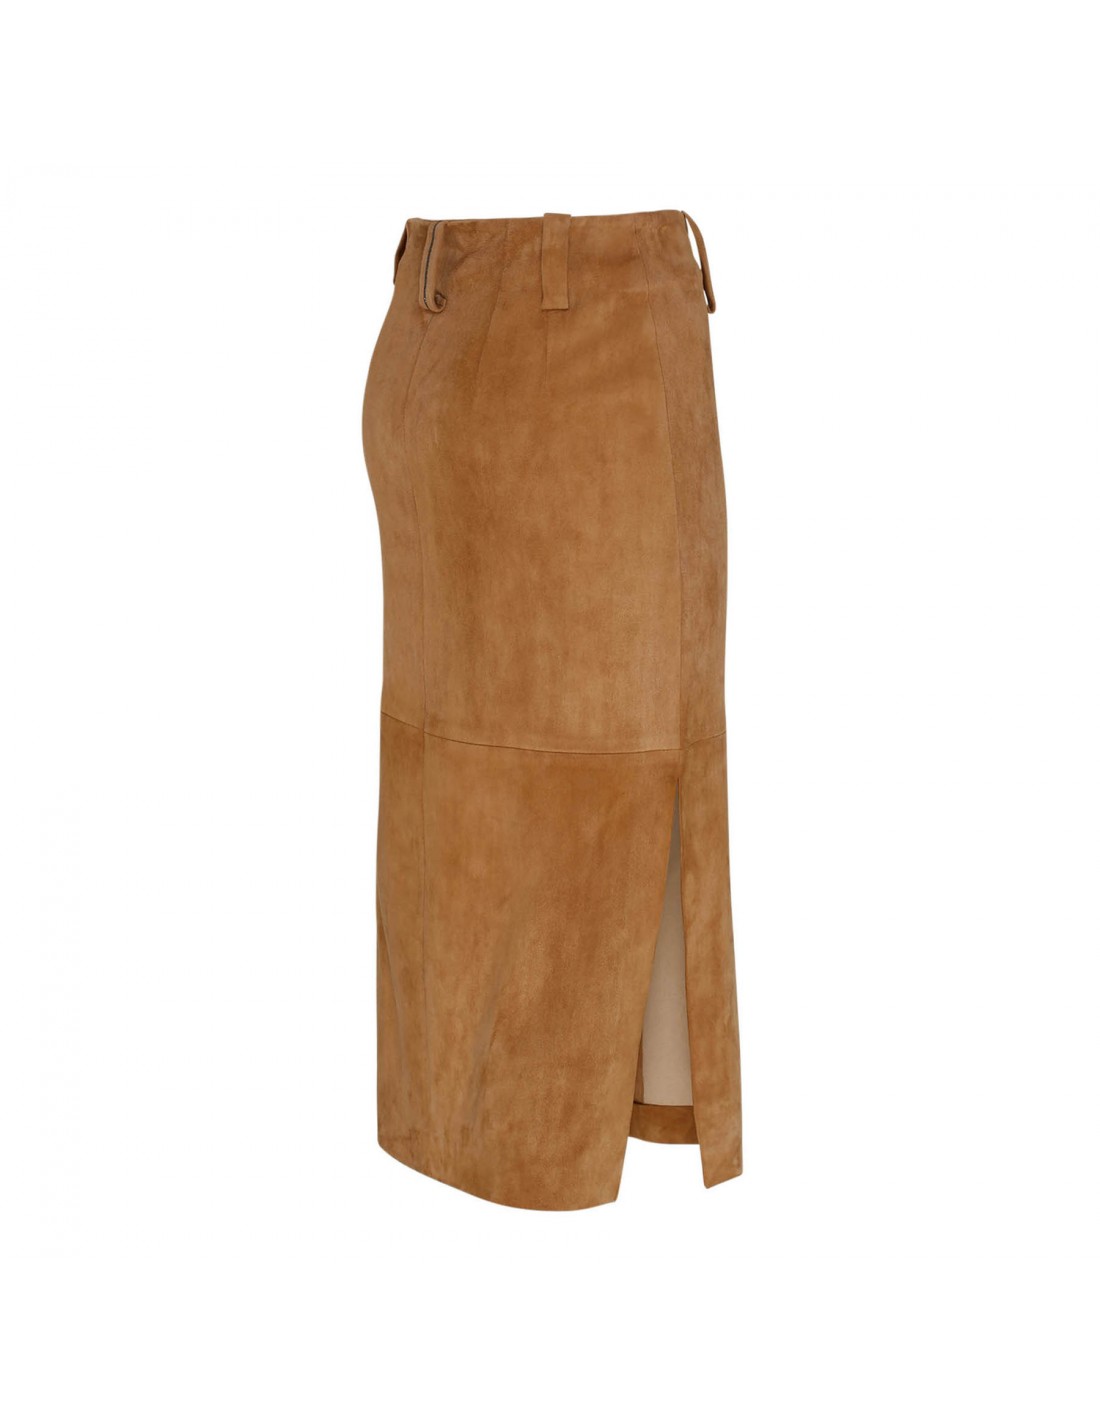 Suede pencil skirt